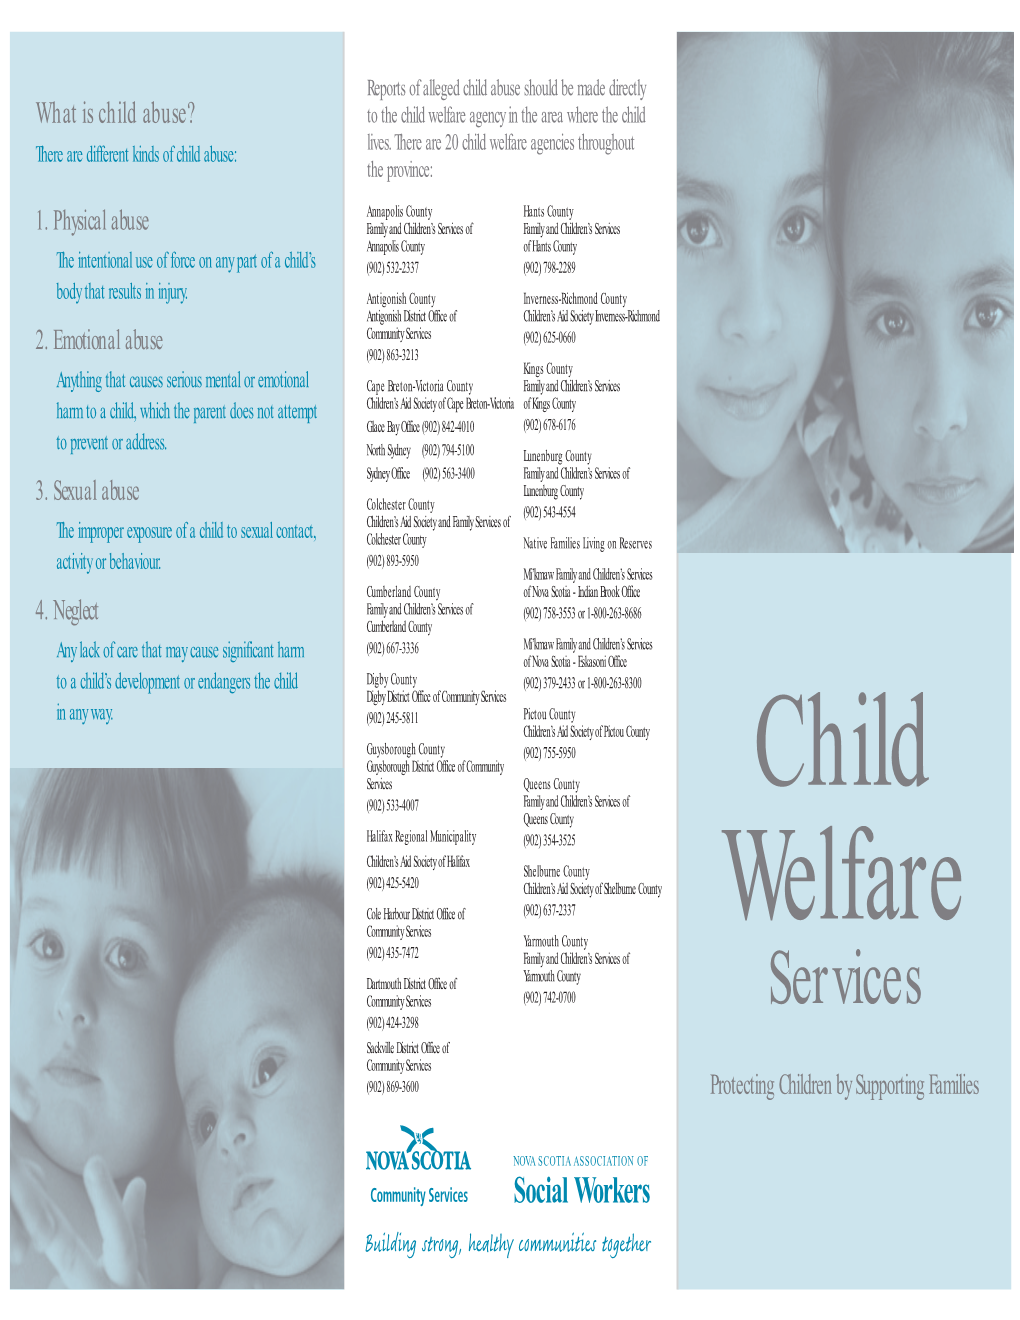 Child Welfare Services? What Rights Do Families Have?